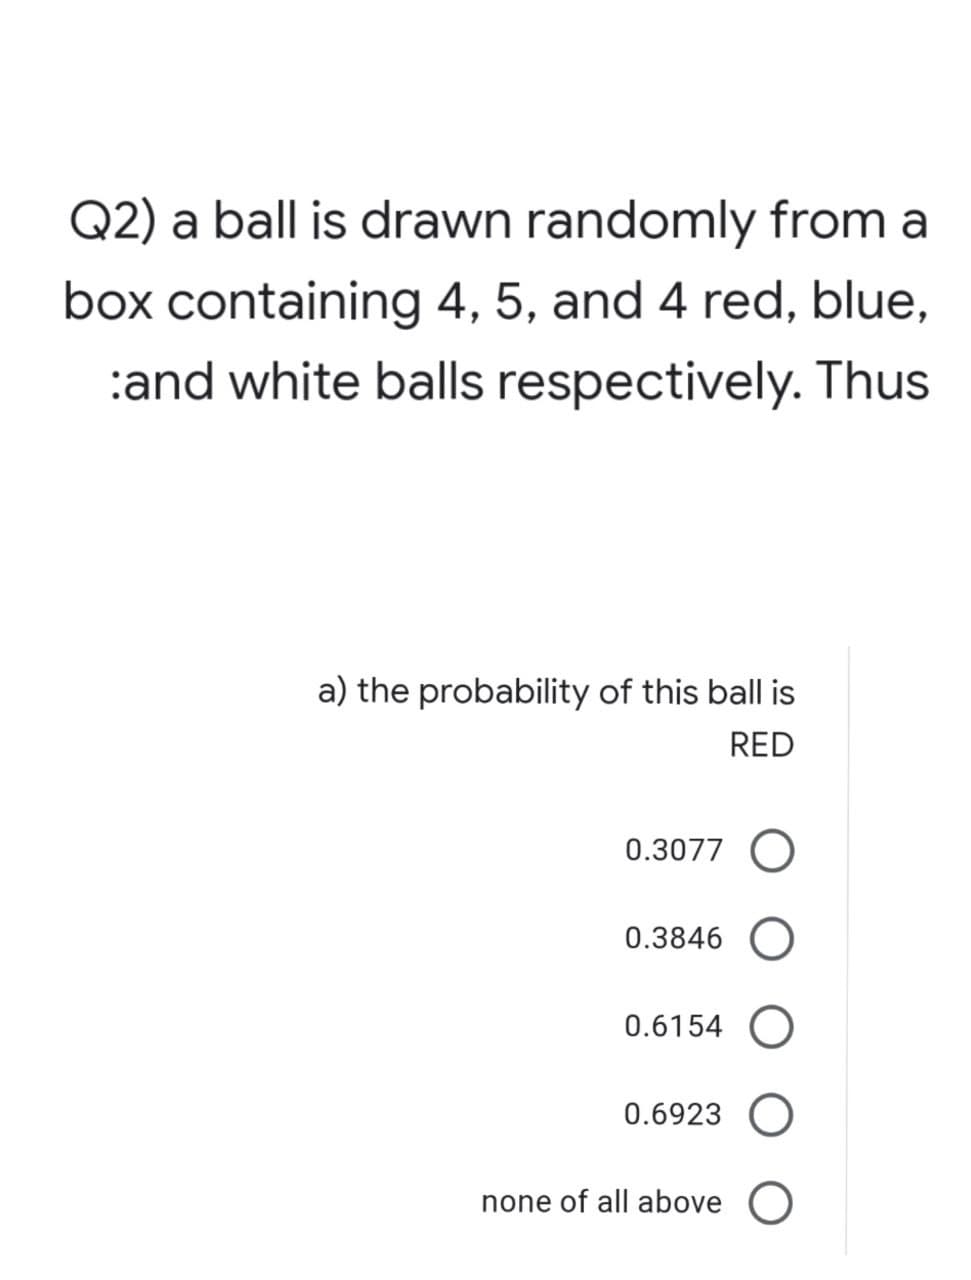 Q2) a ball is drawn randomly from a
box containing 4, 5, and 4 red, blue,
:and white balls respectively. Thus
a) the probability of this ball is
RED
0.3077 O
0.3846 O
0.6154 O
0.6923 O
none of all above O